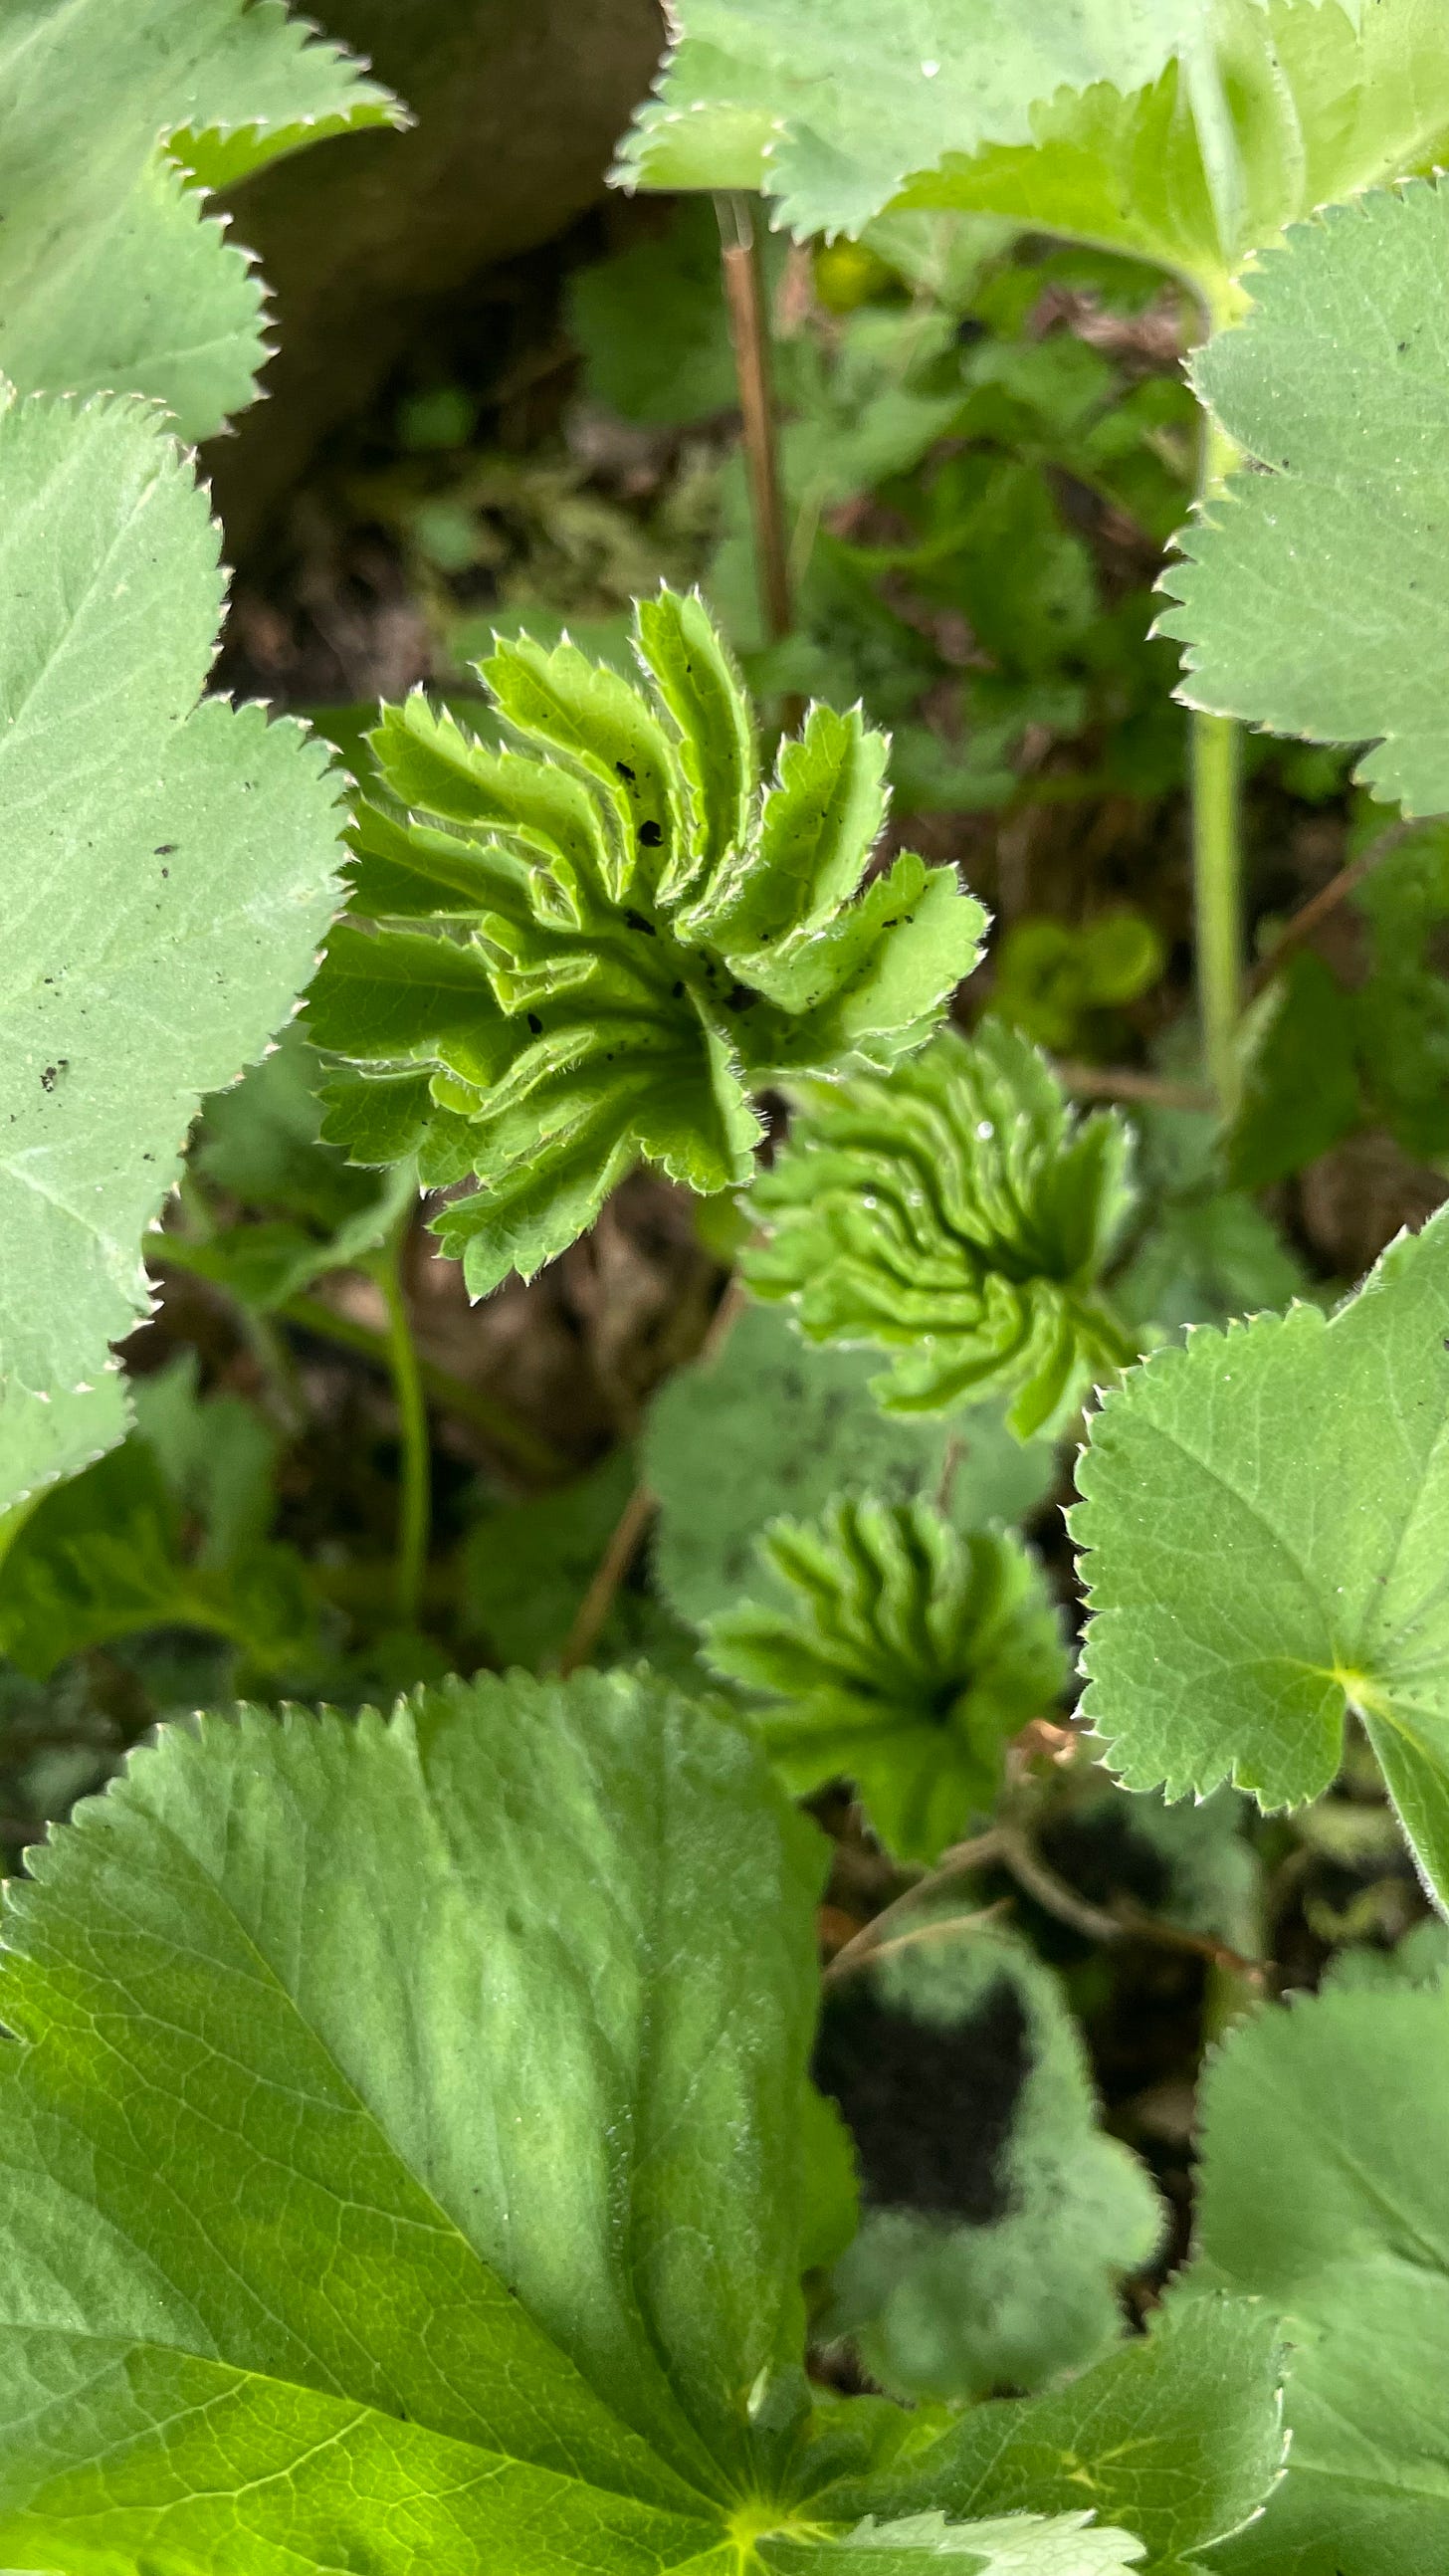 multiple leaves of the lady's mantle plant. The focus is on the new leaves starting to open up and unravel.